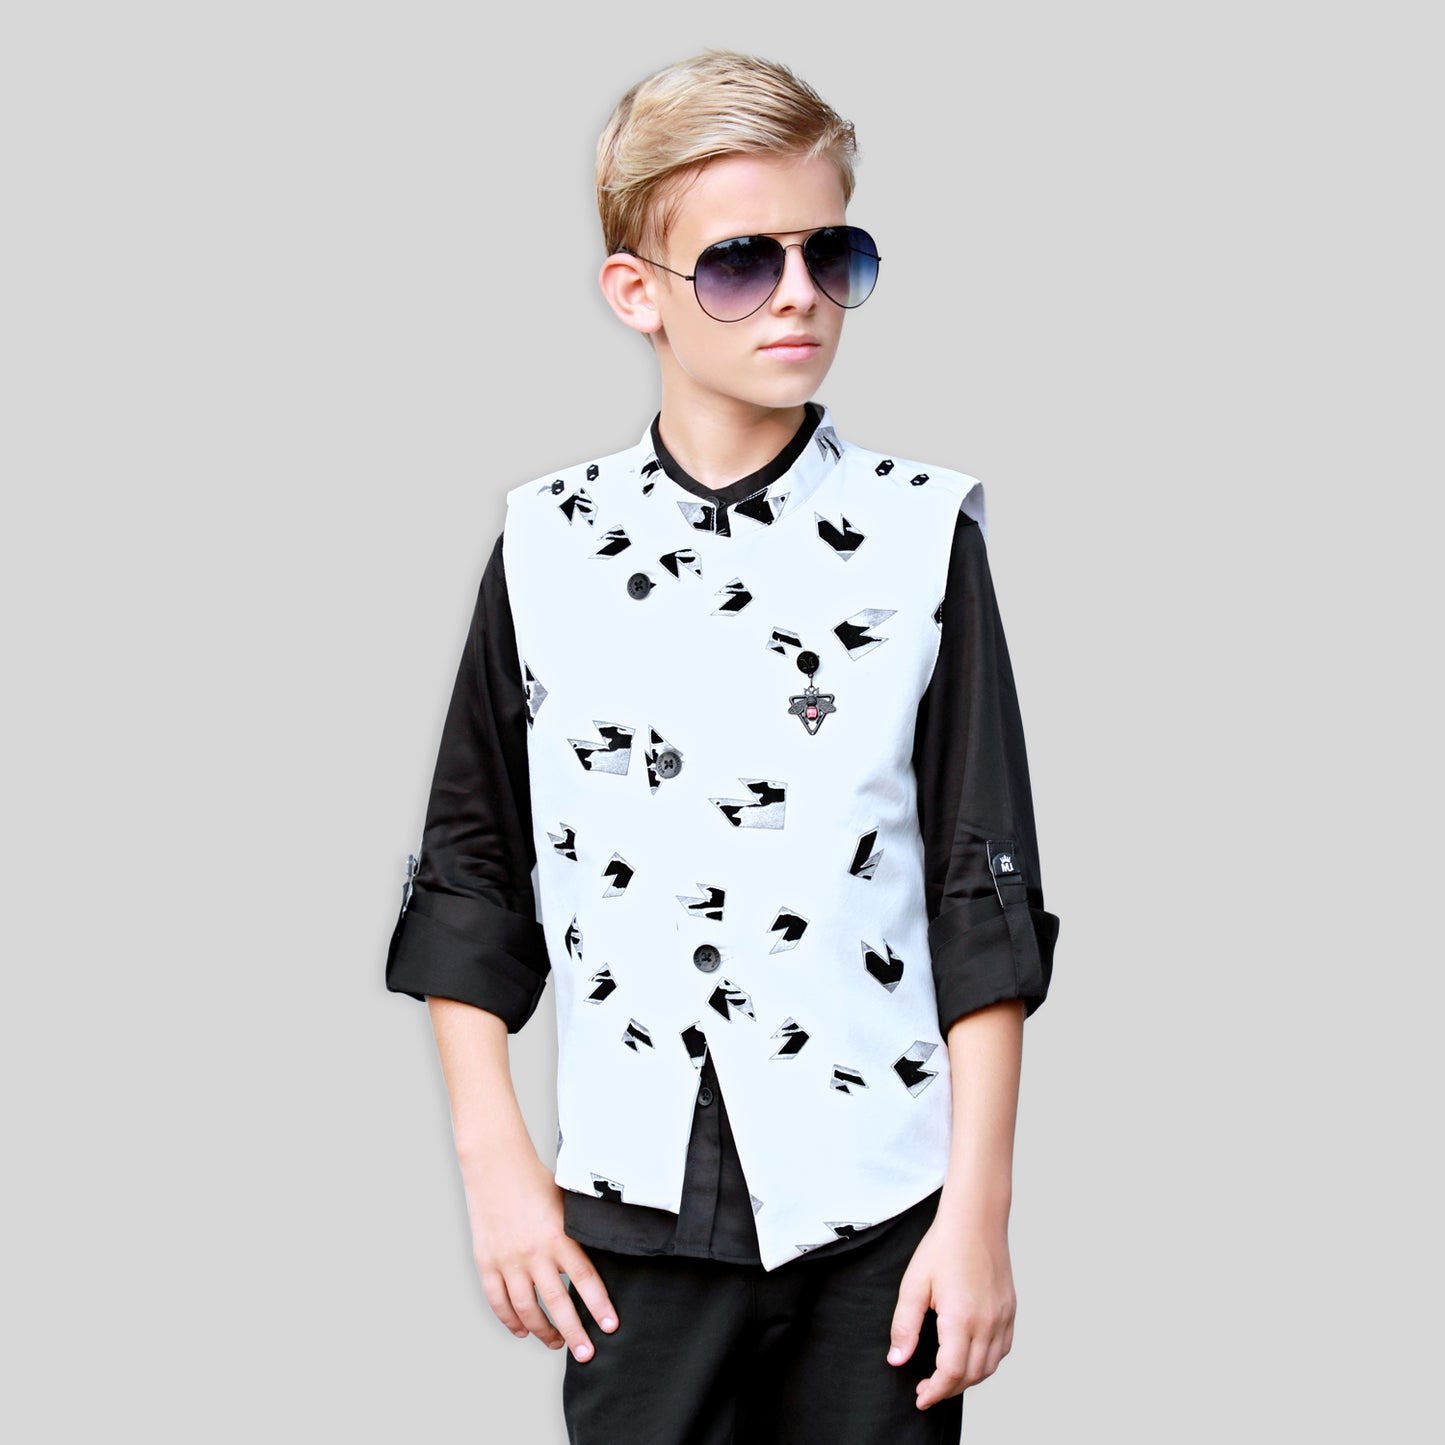 Fashionable jacket set  for Young boys